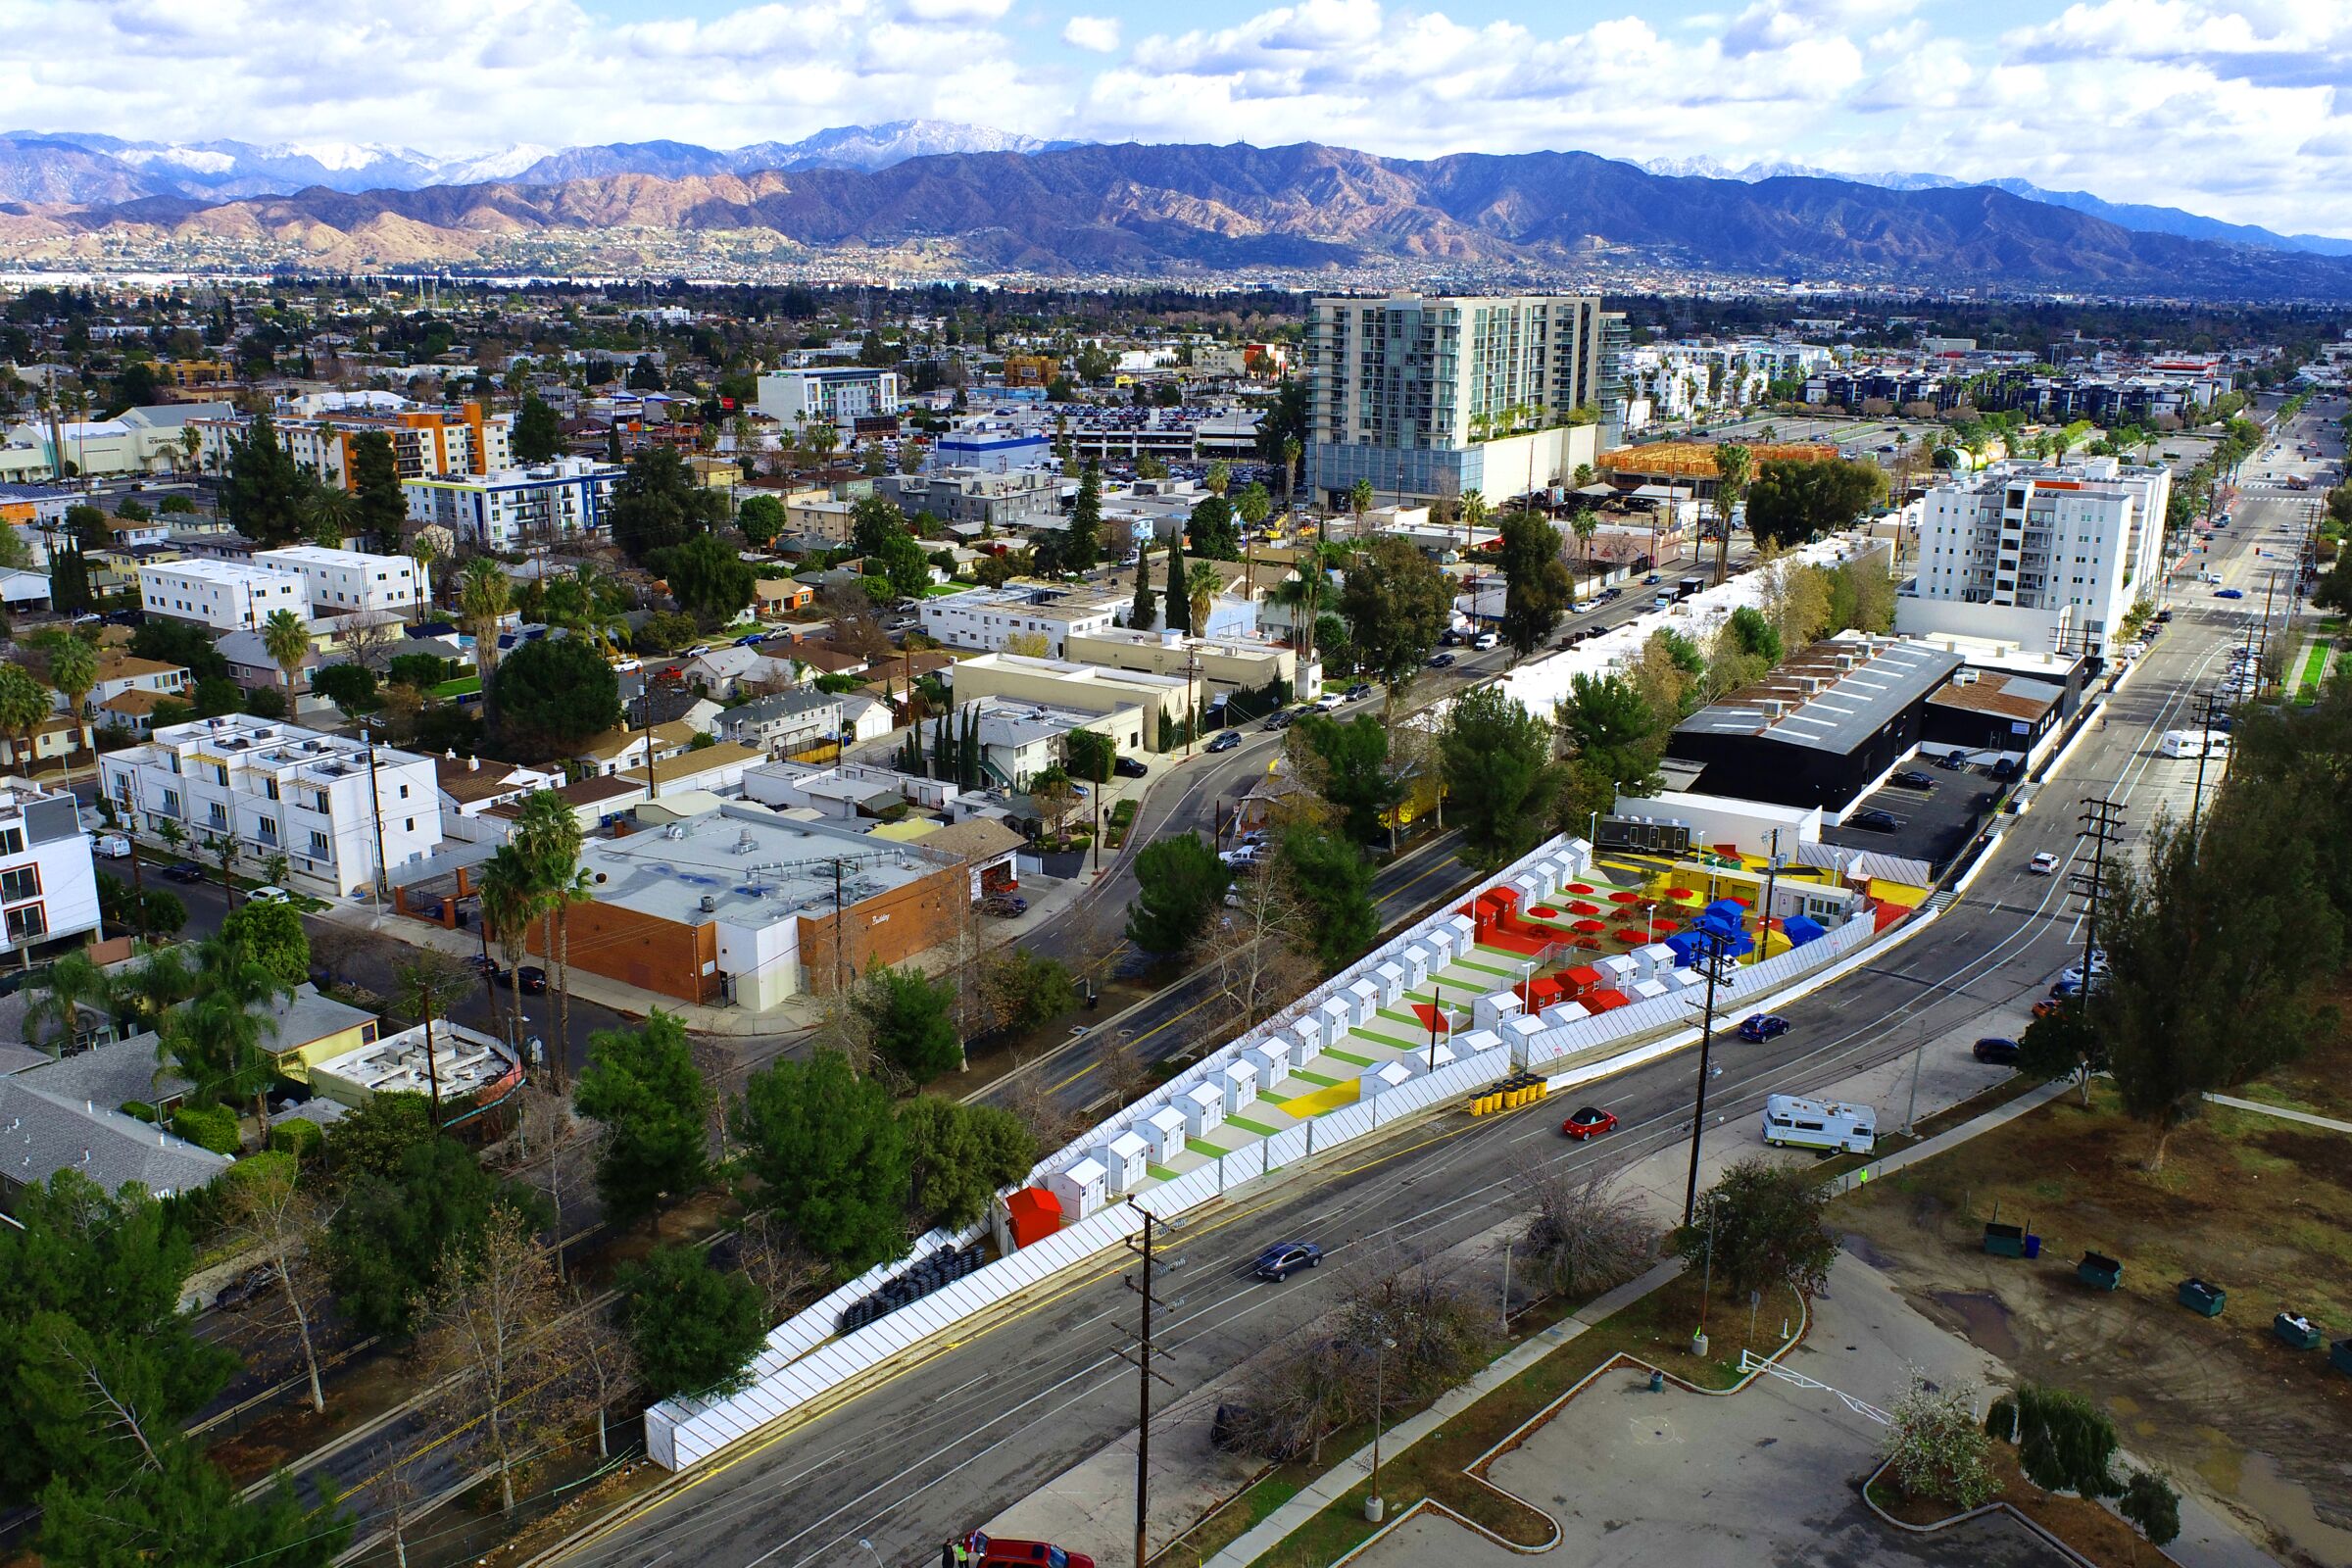 An aerial view shows tiny homes in shades of white, red, blue and yellow tucked into a narrow triangle of land